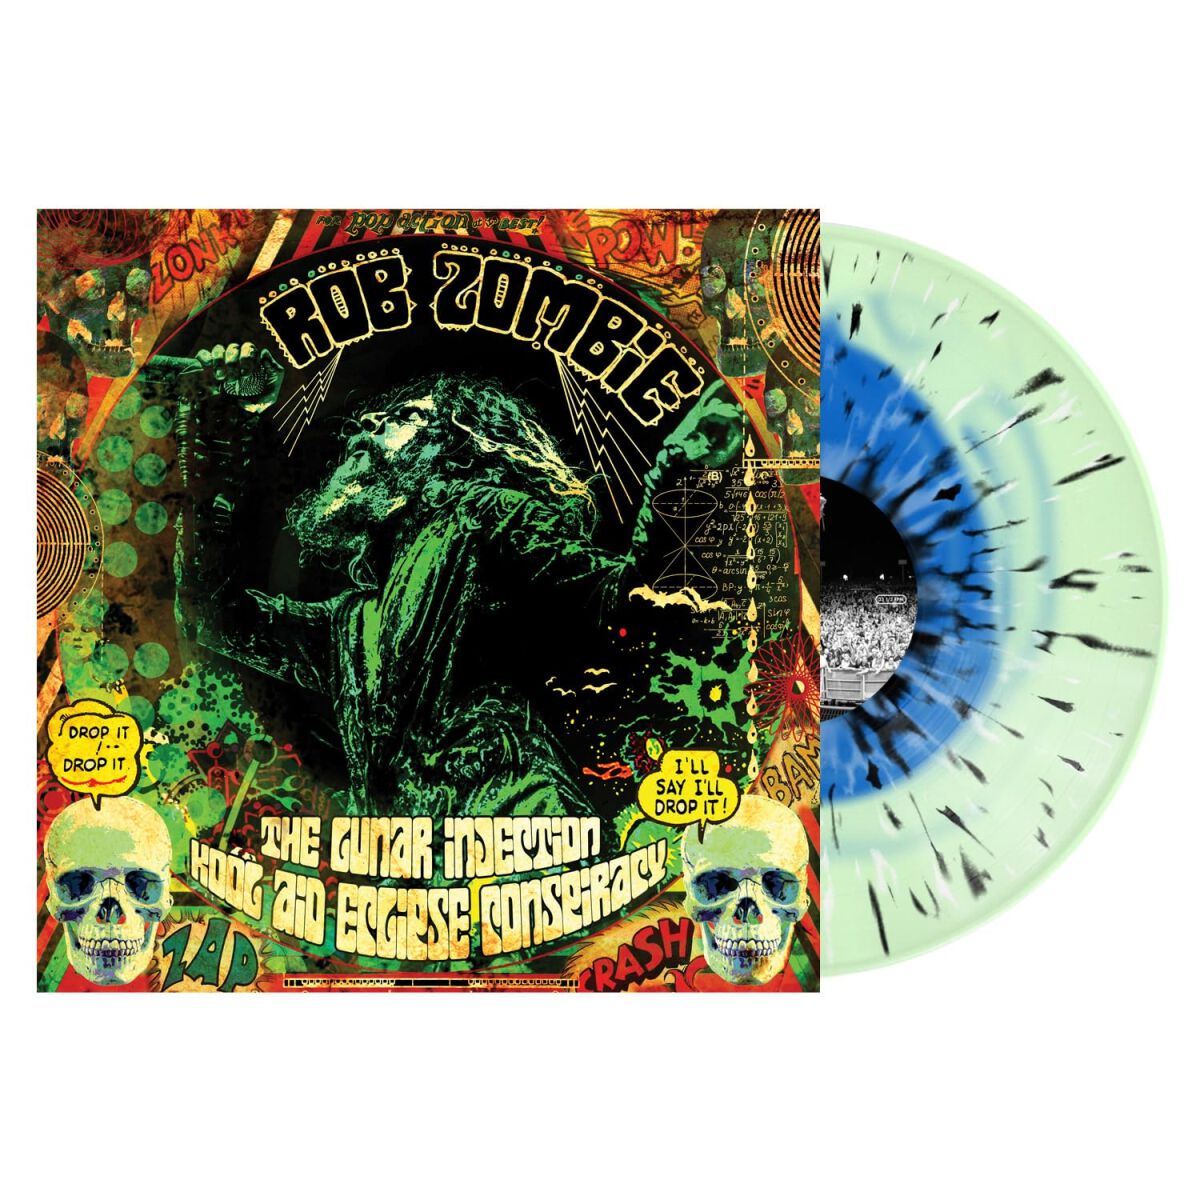 Rob Zombie The lunar injection kool aid eclipse conspiracy LP multicolor